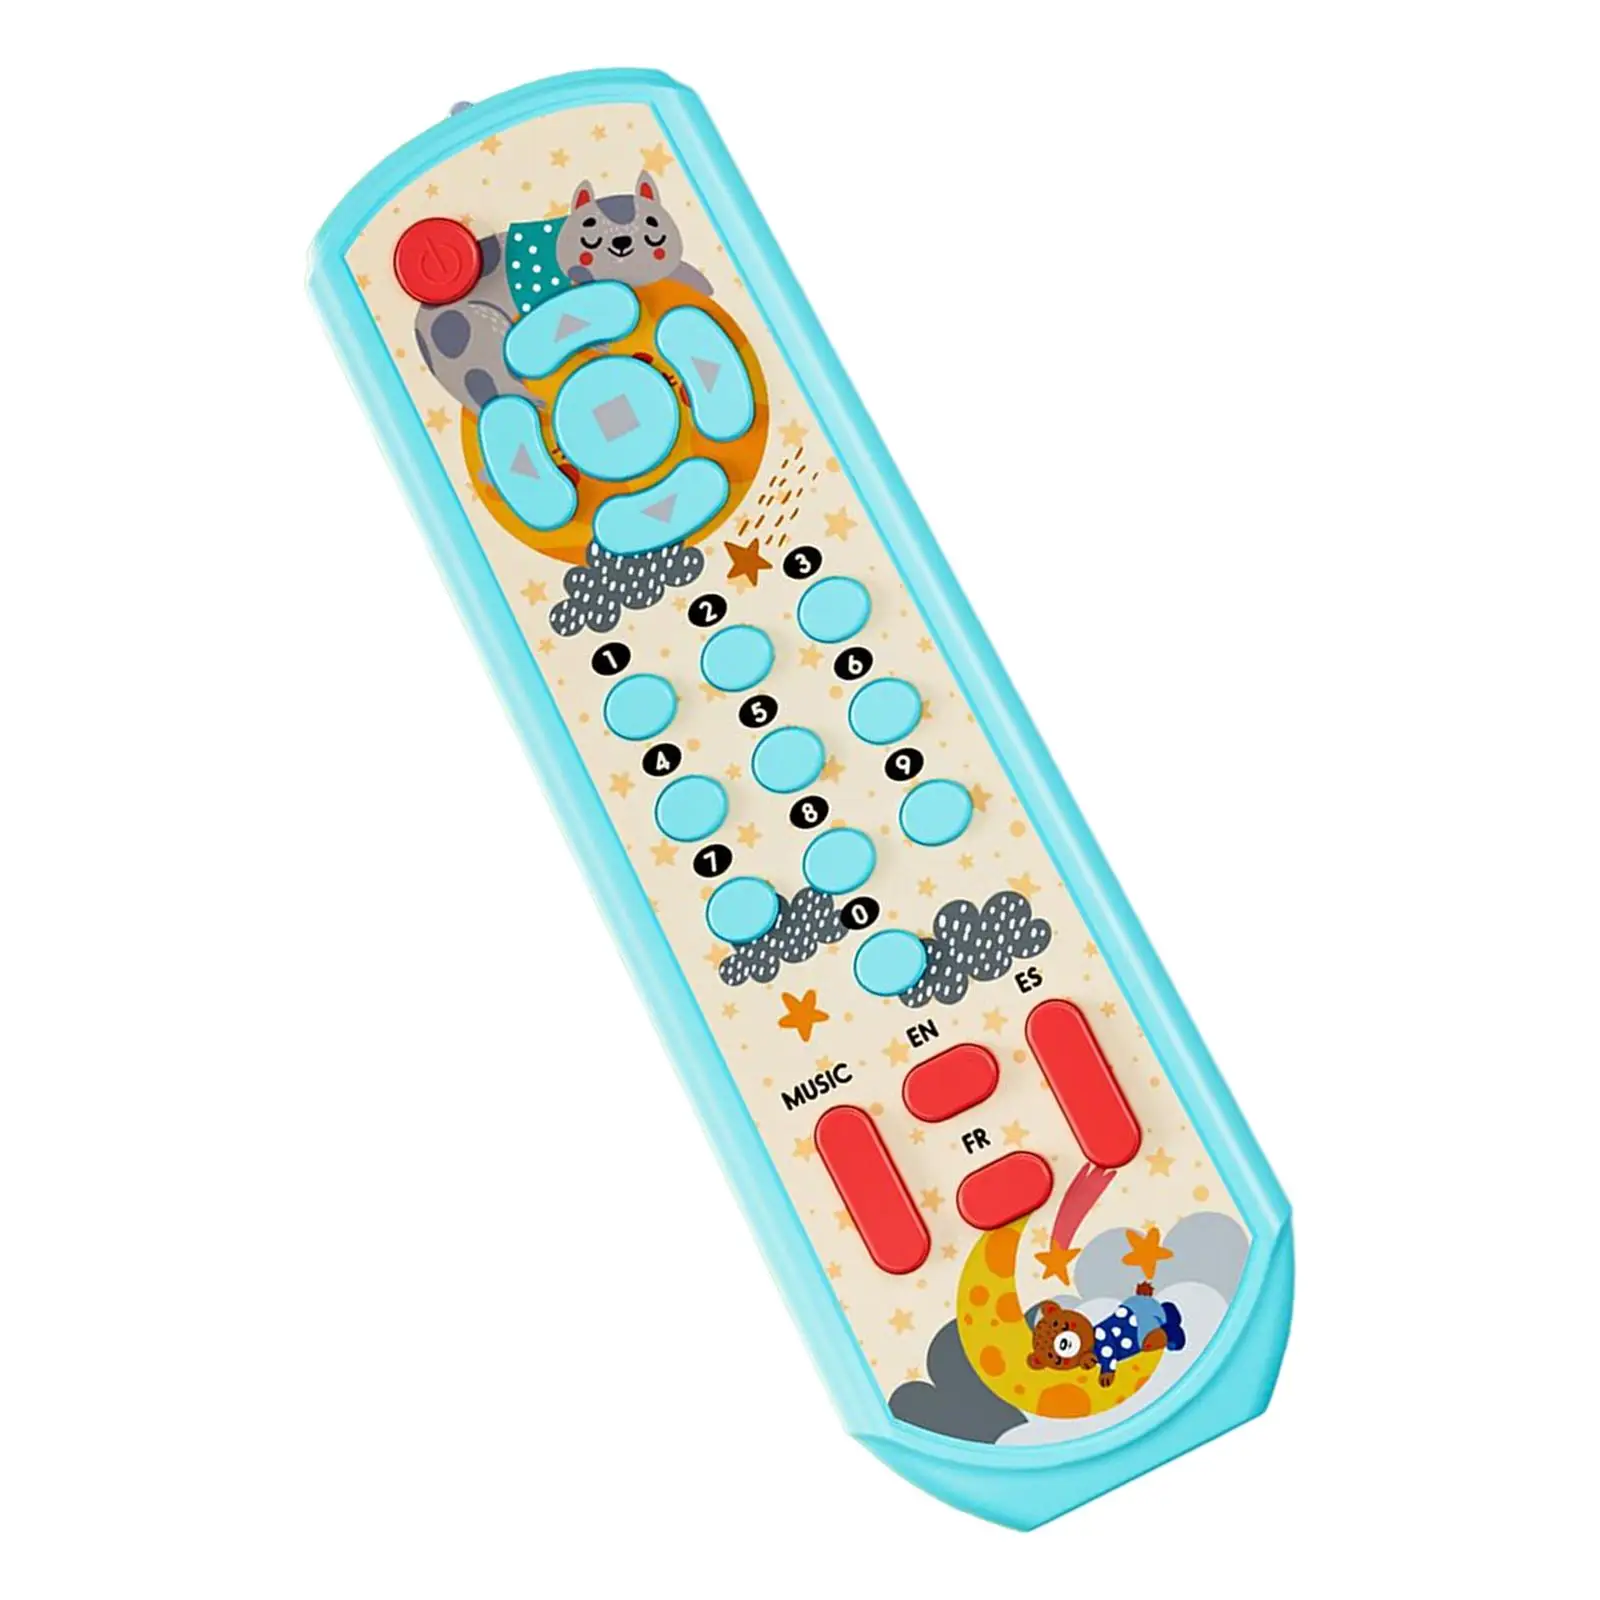 Remote Control Toys Numbers Learning Machine Realistic Toy Remote Early Educational Toys for Children Baby Gifts